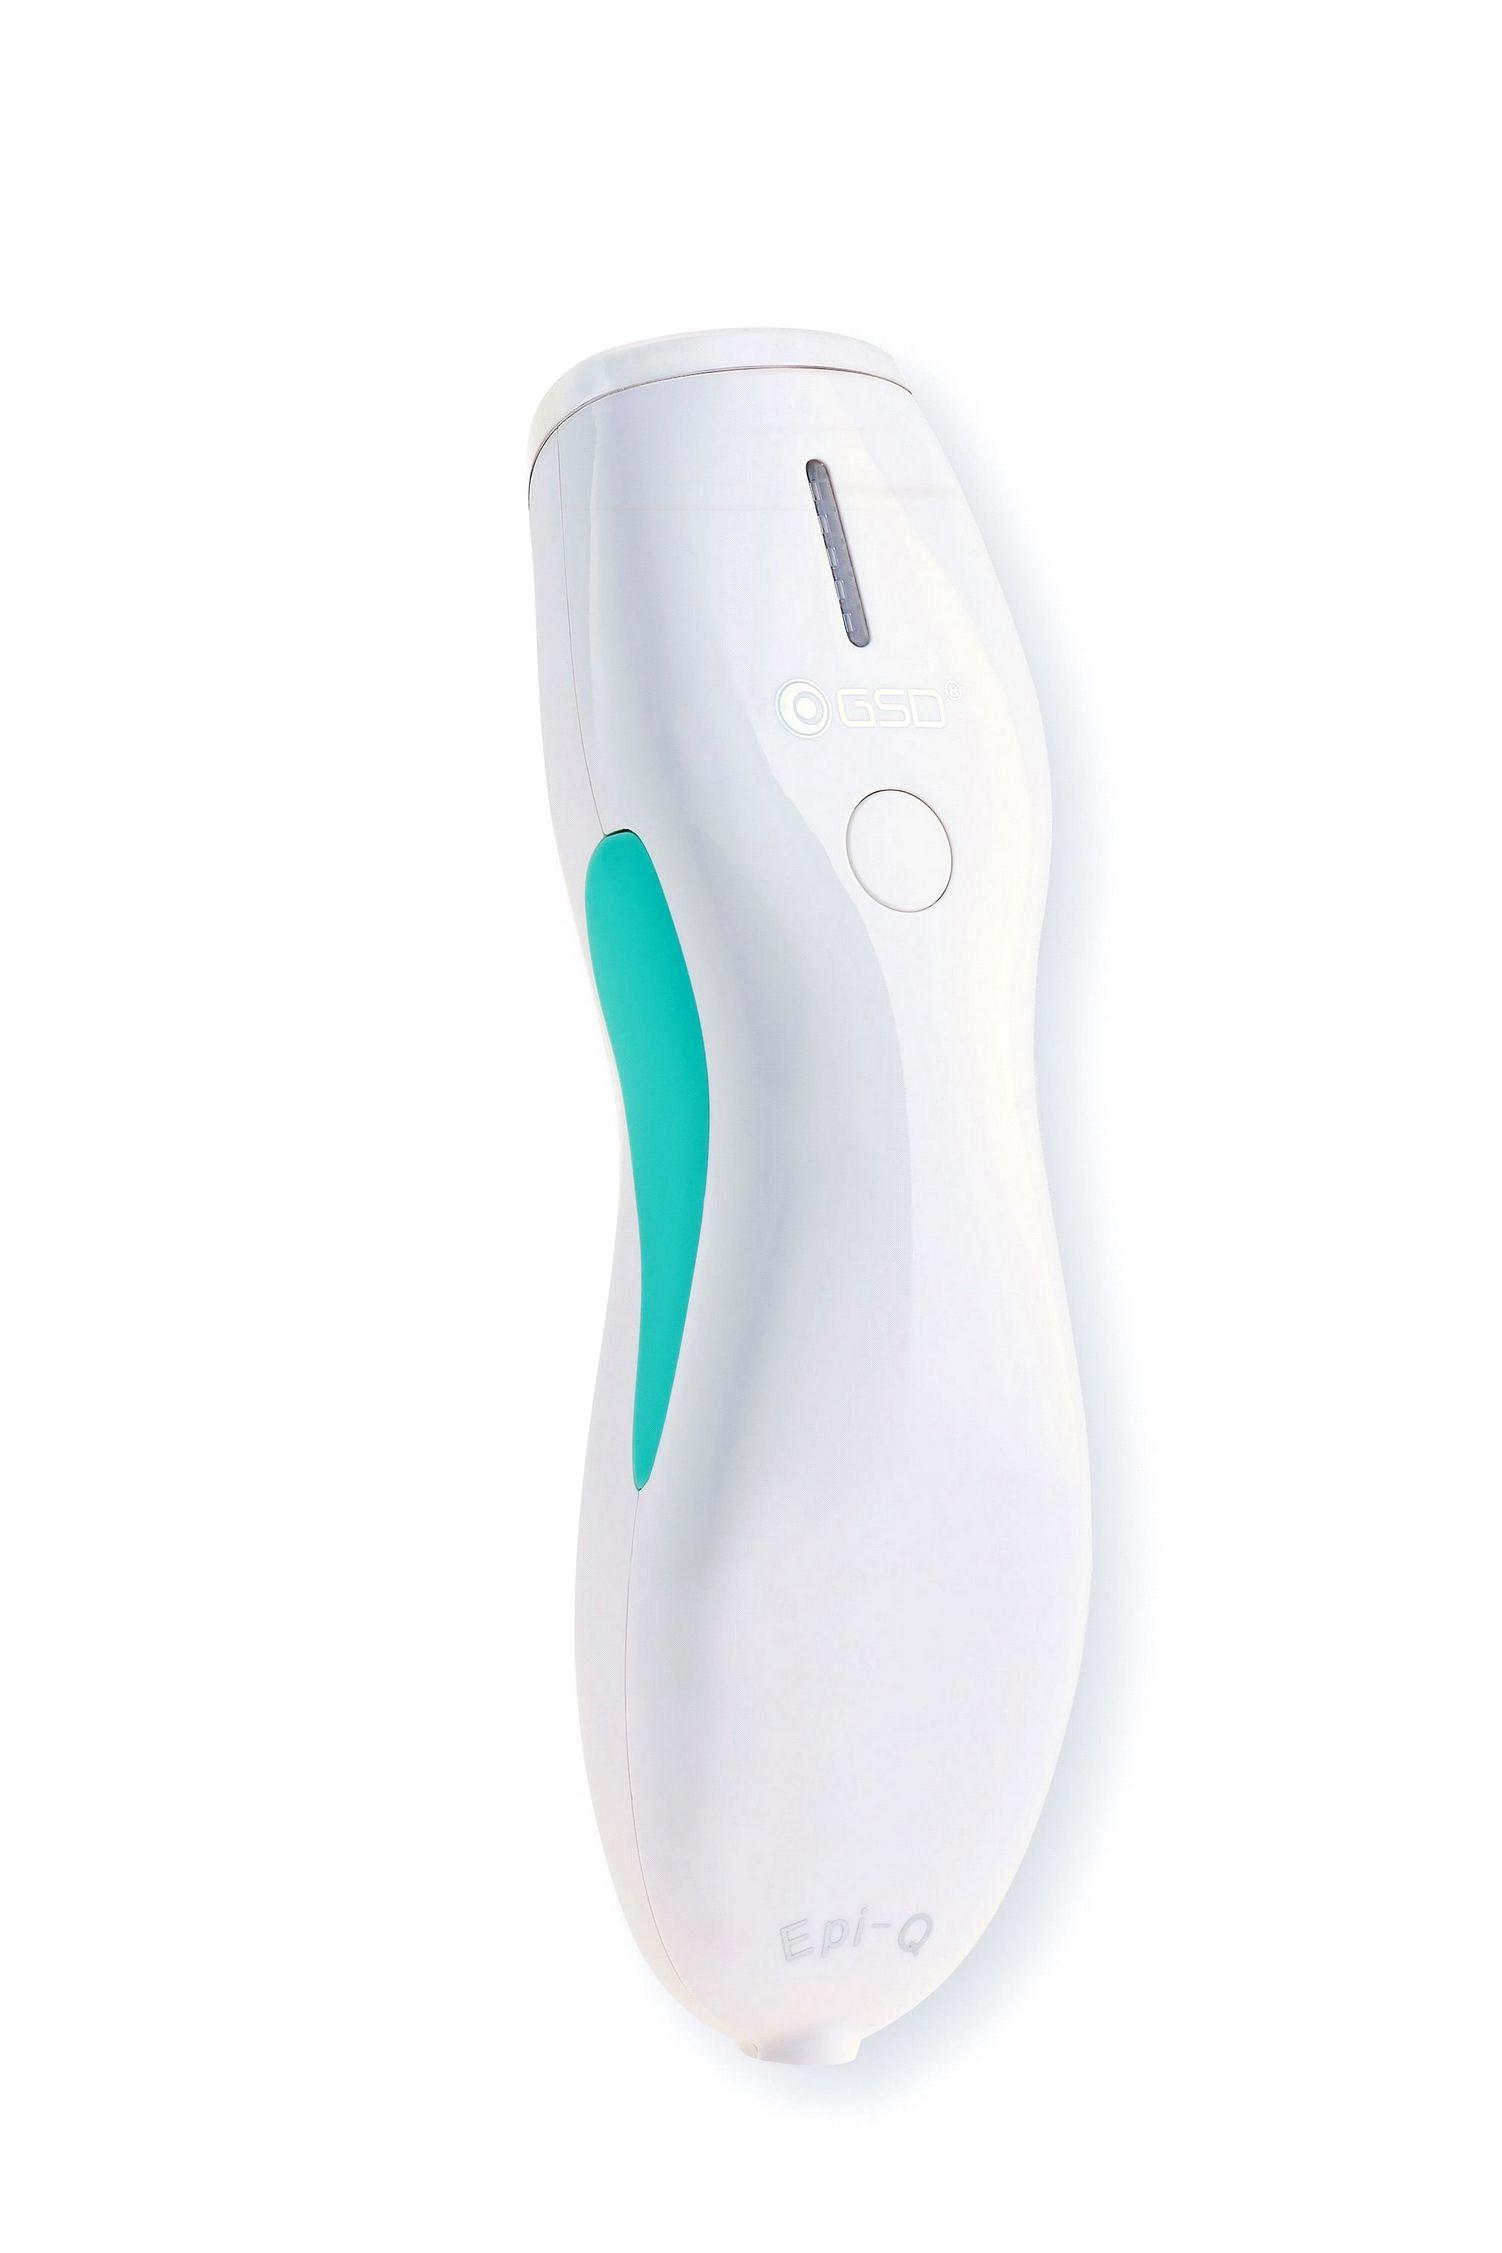 Epi Q Home Laser Hair Removal System Realizes Personal Laser